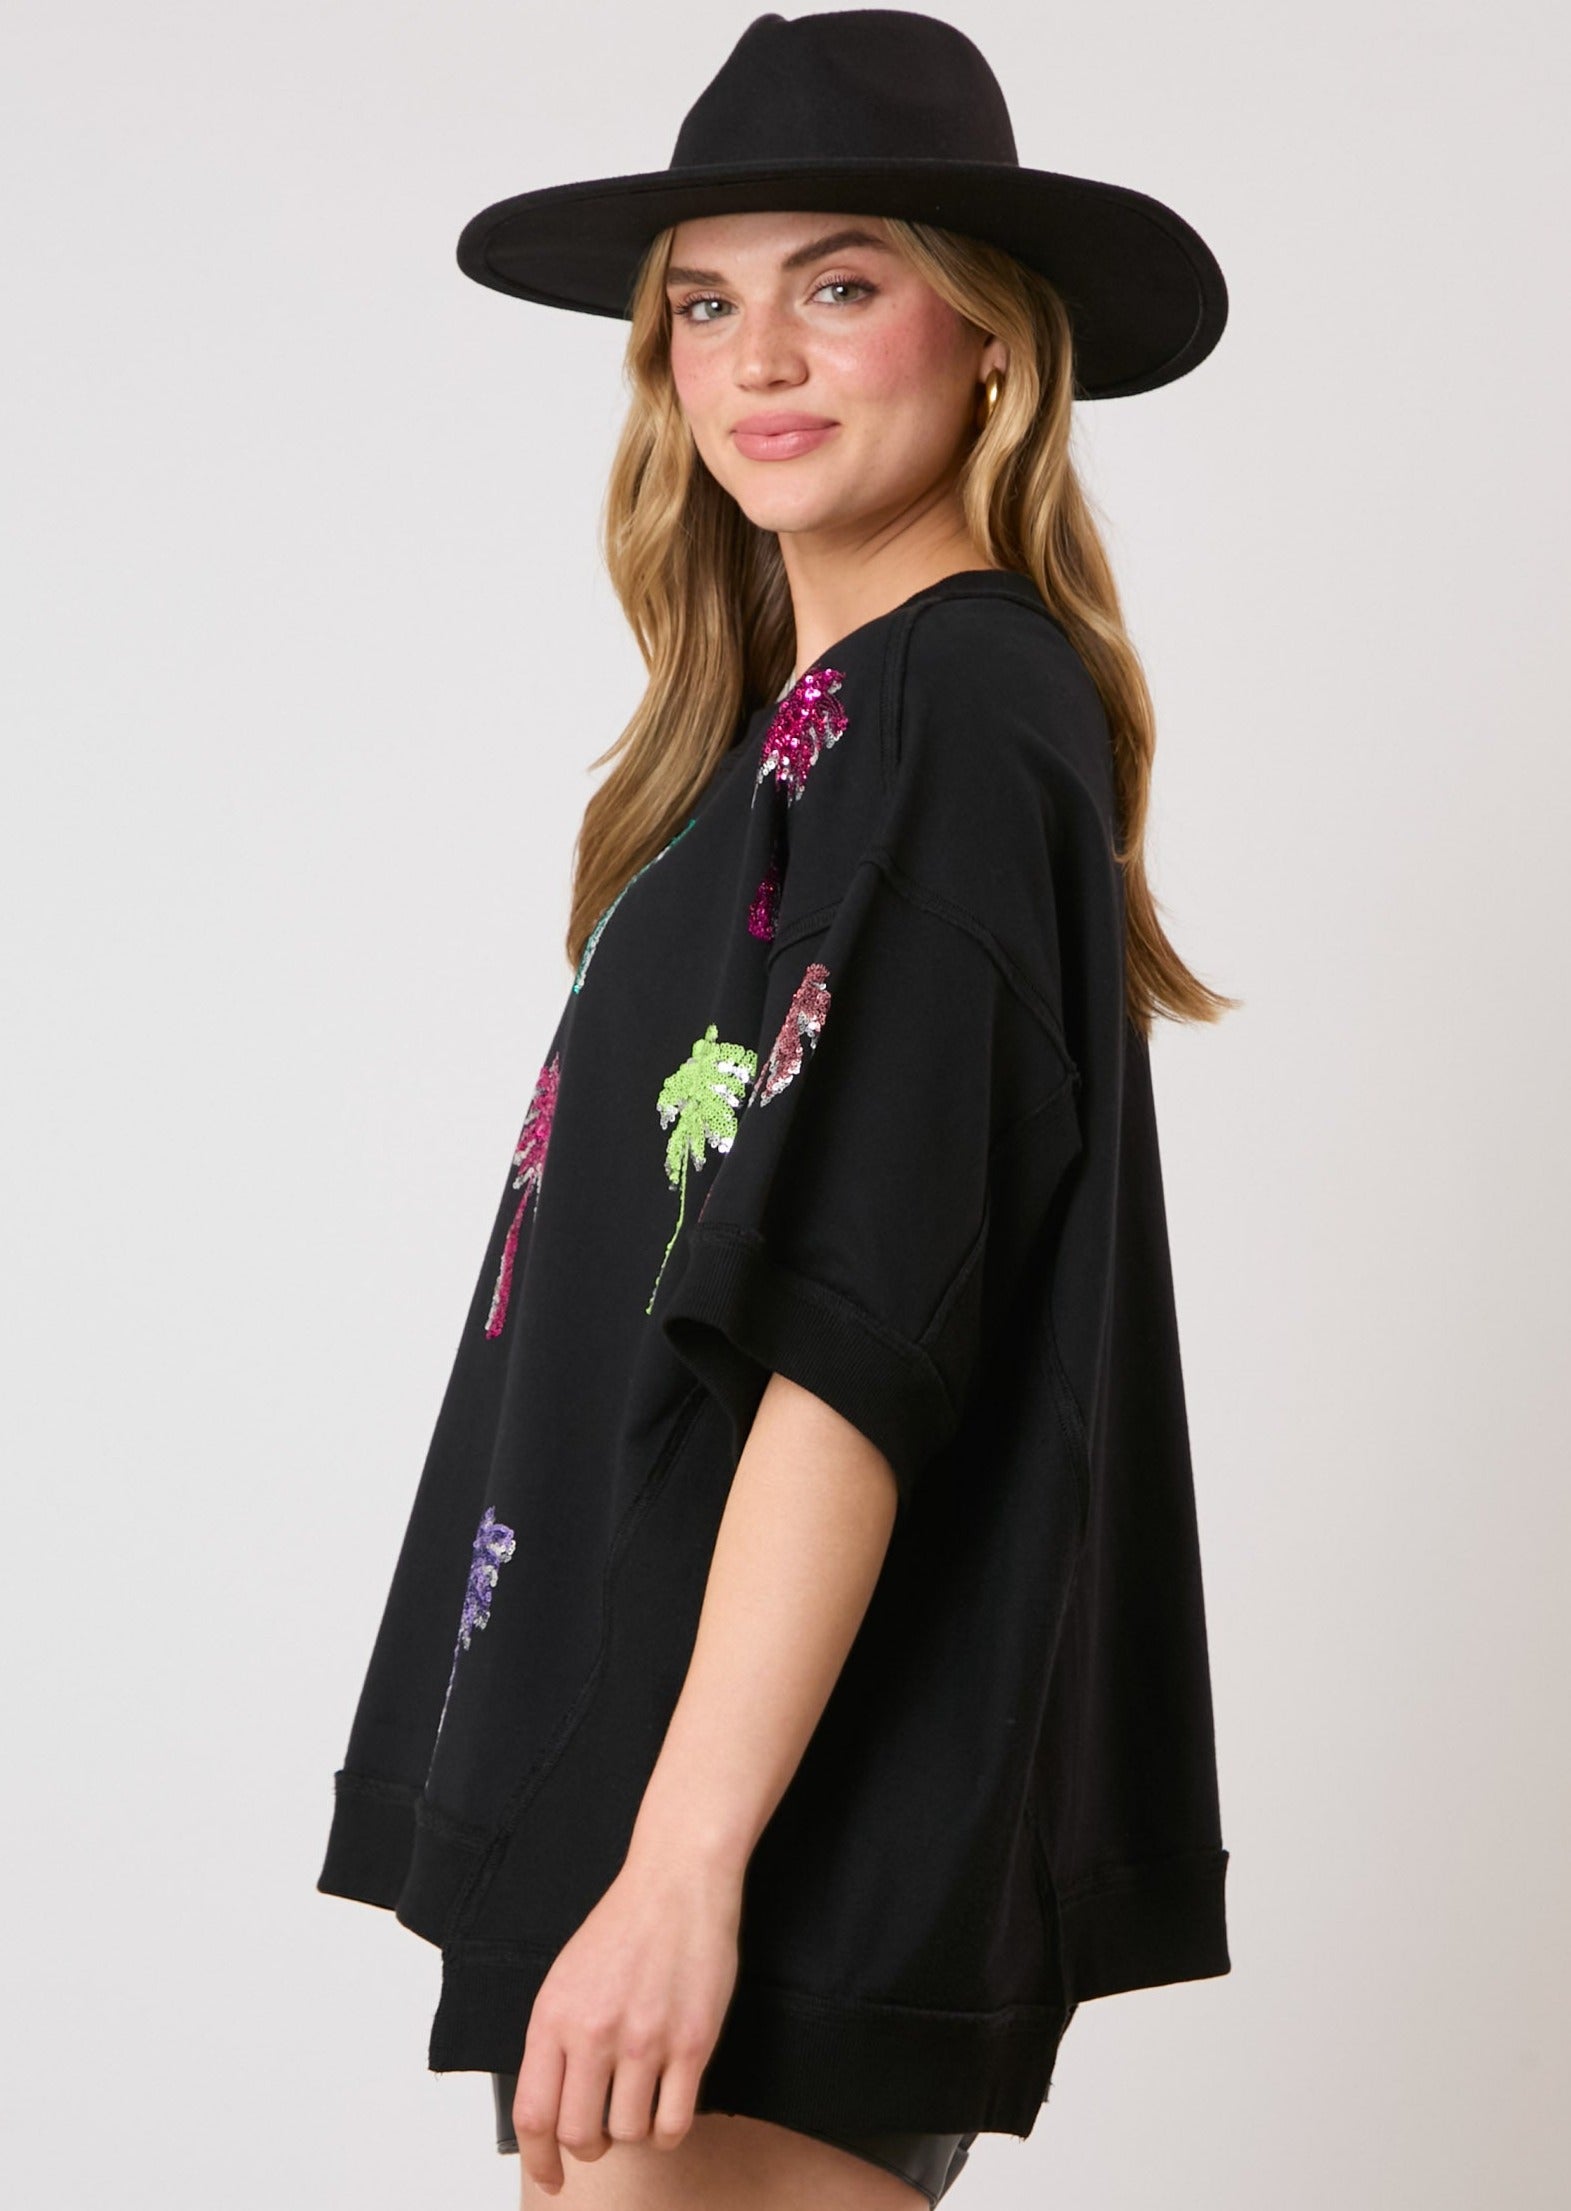 Palm Tree Sequins Embroidery Oversized Short Sleeve Top-Apparel-Fantastic Fawn-LouisGeorge Boutique, Women’s Fashion Boutique Located in Trussville, Alabama